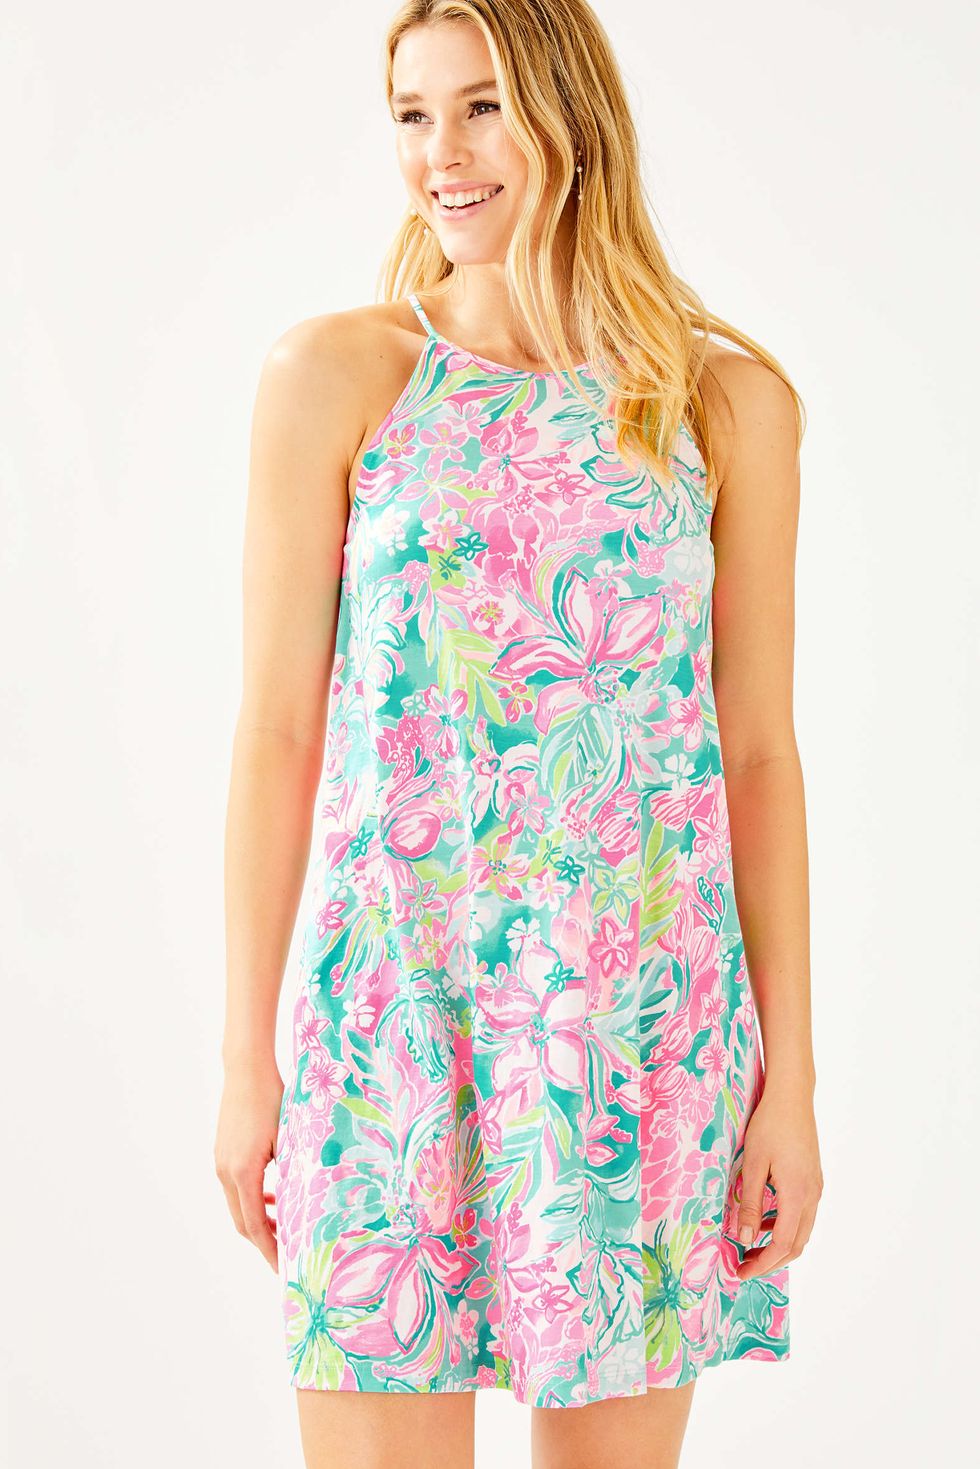 Shop Lilly Pulitzer Dresses, Tops, and Pants at the After Party Sale